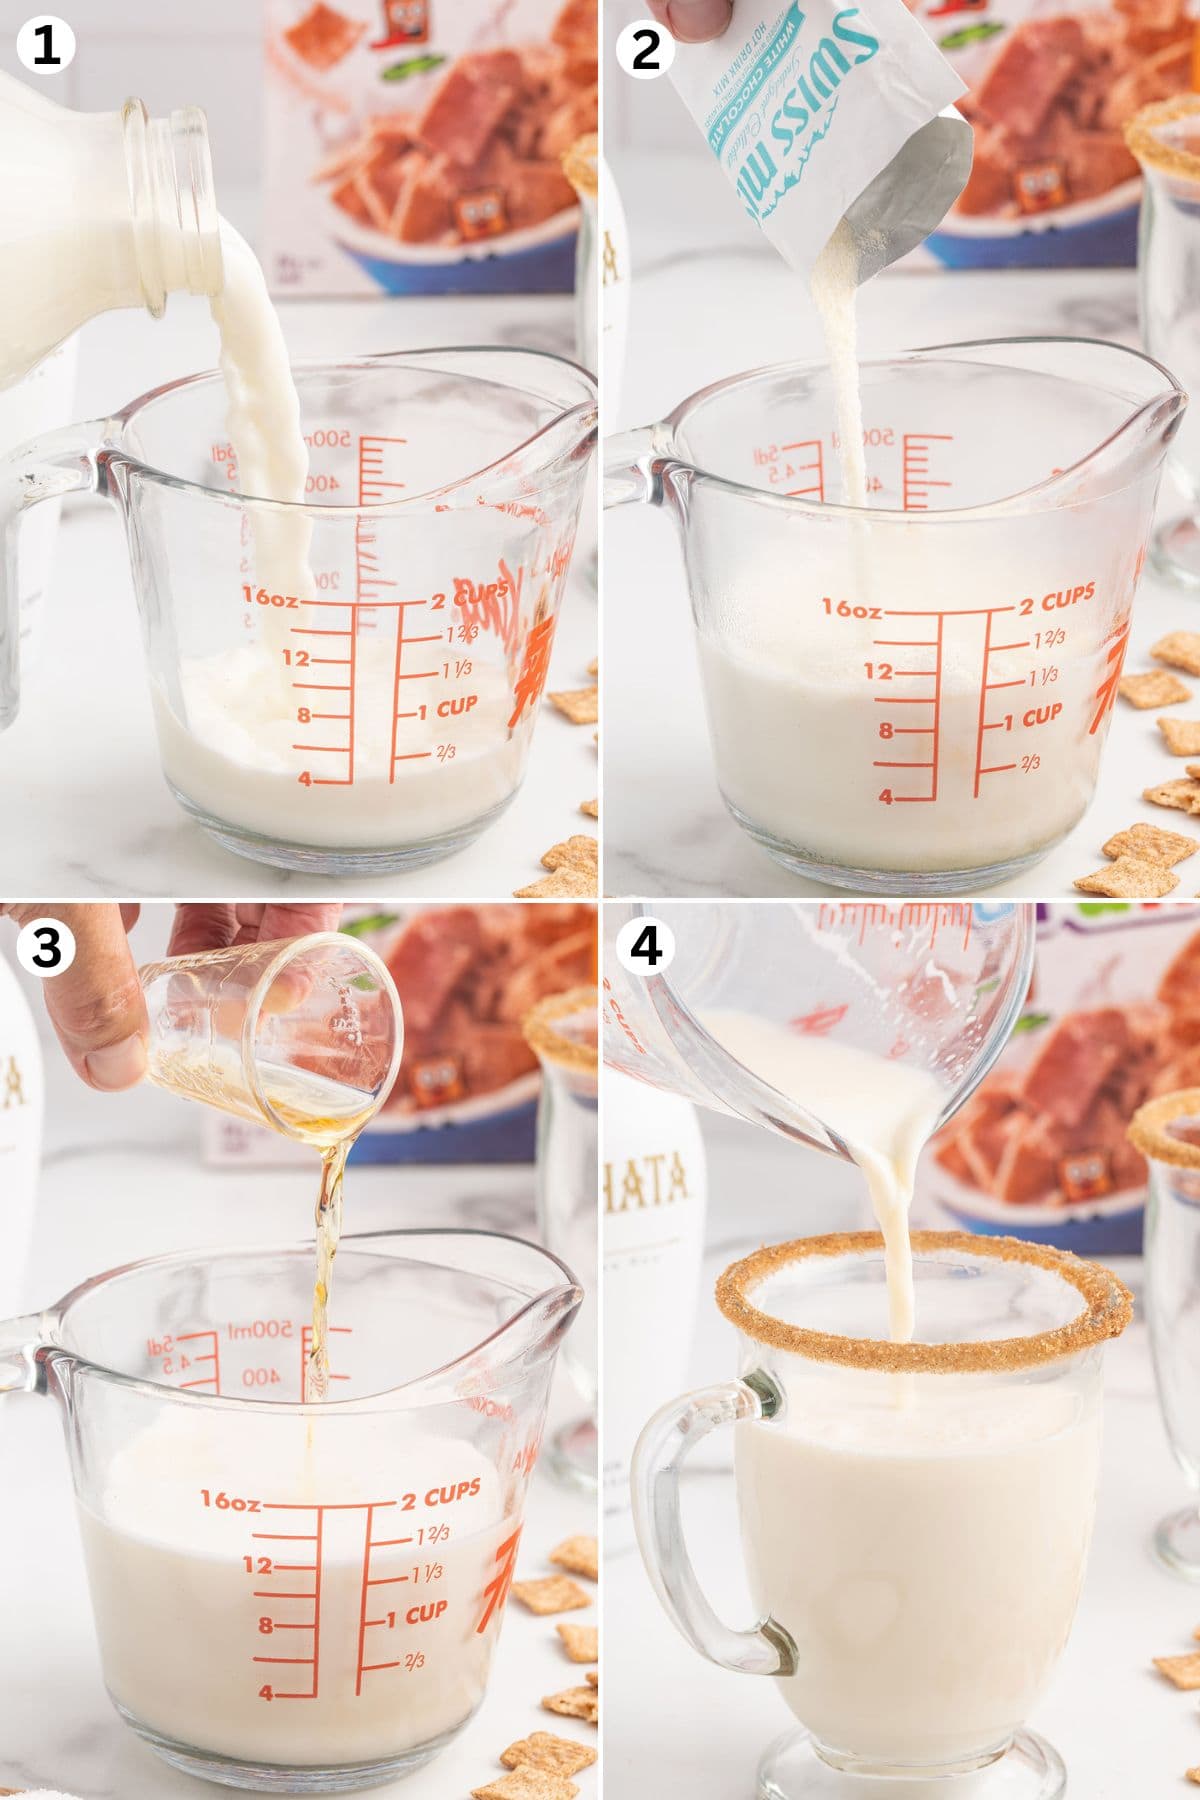 In a microwave safe mug pour the milk, next is white chocolate and then RumChata cream liqueur and Fireball cinnamon whisky. Pour the cinnamon toast crunch cocktail into the cinnamon sugar-rimmed glass mug.